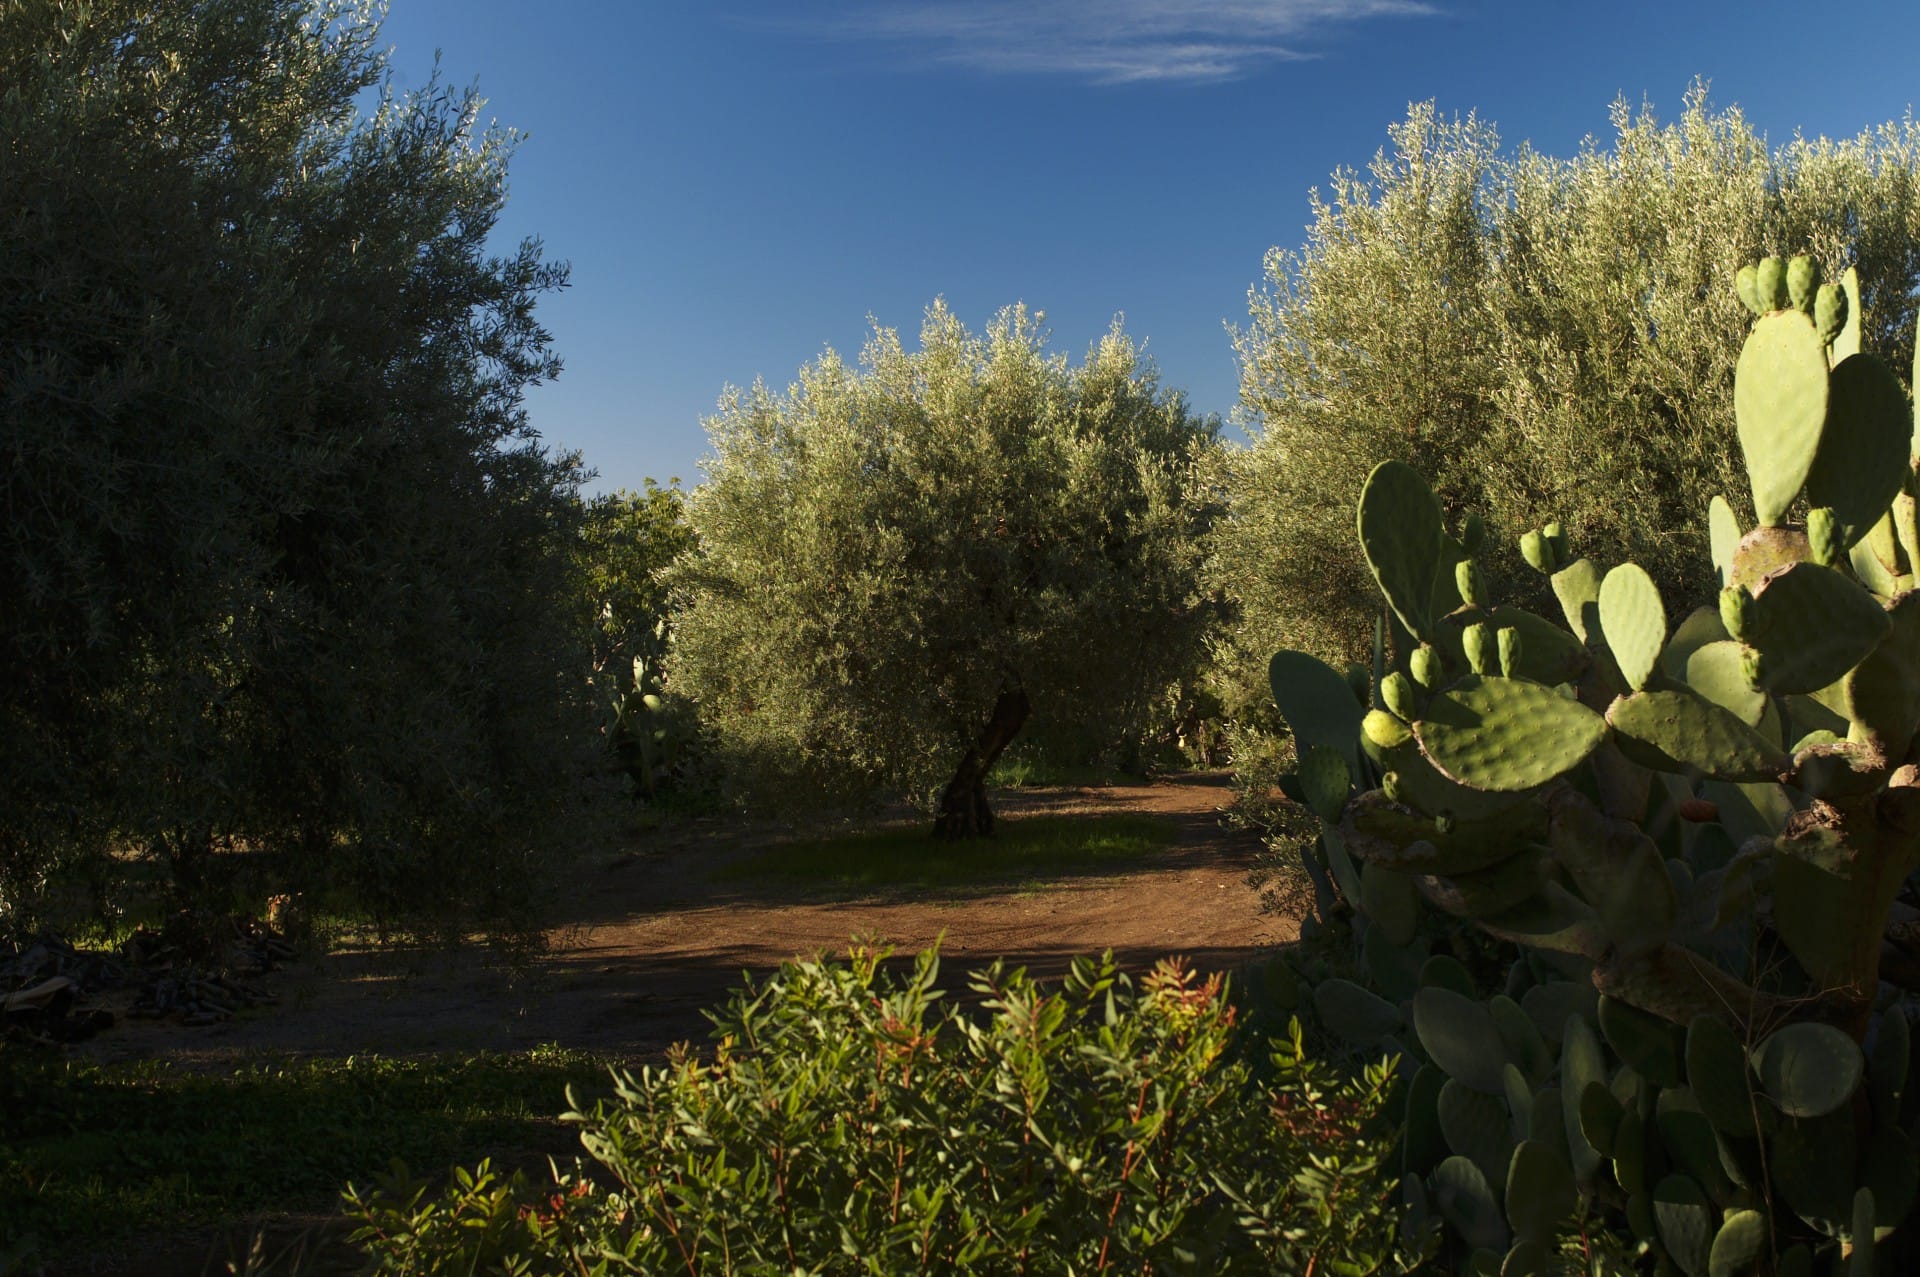 europe-the-best-olive-oils-competitions-production-sicilian-and-sardinian-growers-triumph-in-world-competition-olive-oil-times